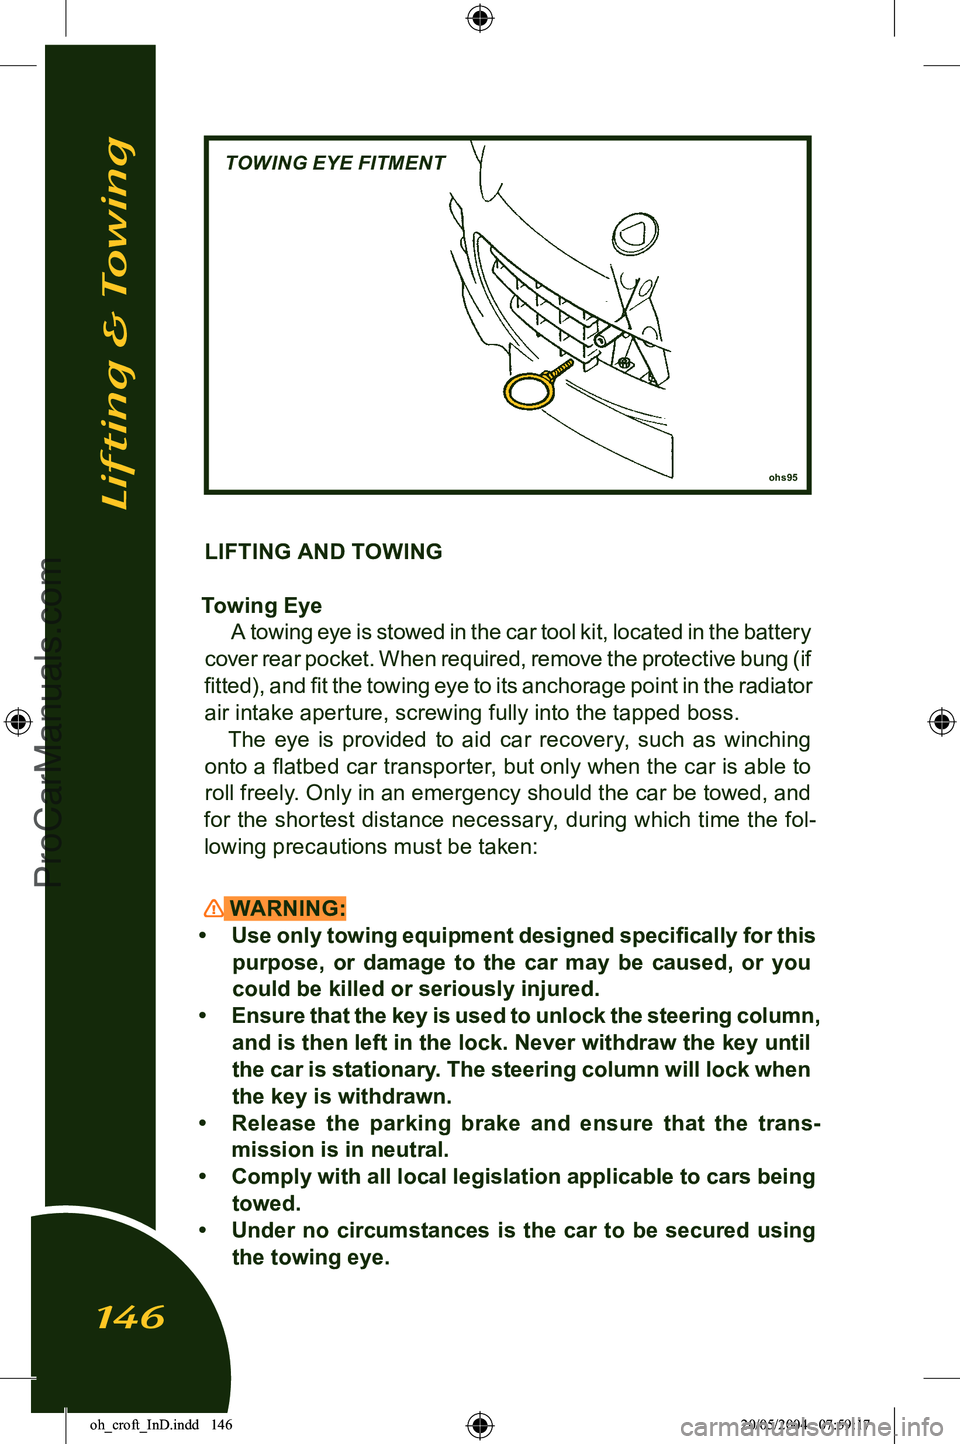 LOTUS ELISE 2005  Owners Manual 
LIFTING AND TOWING
Towing Eye A towing eye is stowed in the car tool kit, located in the battery 
cover rear pocket. When required, remove the protective bung (if 
ﬁtted), and ﬁt the towing eye t